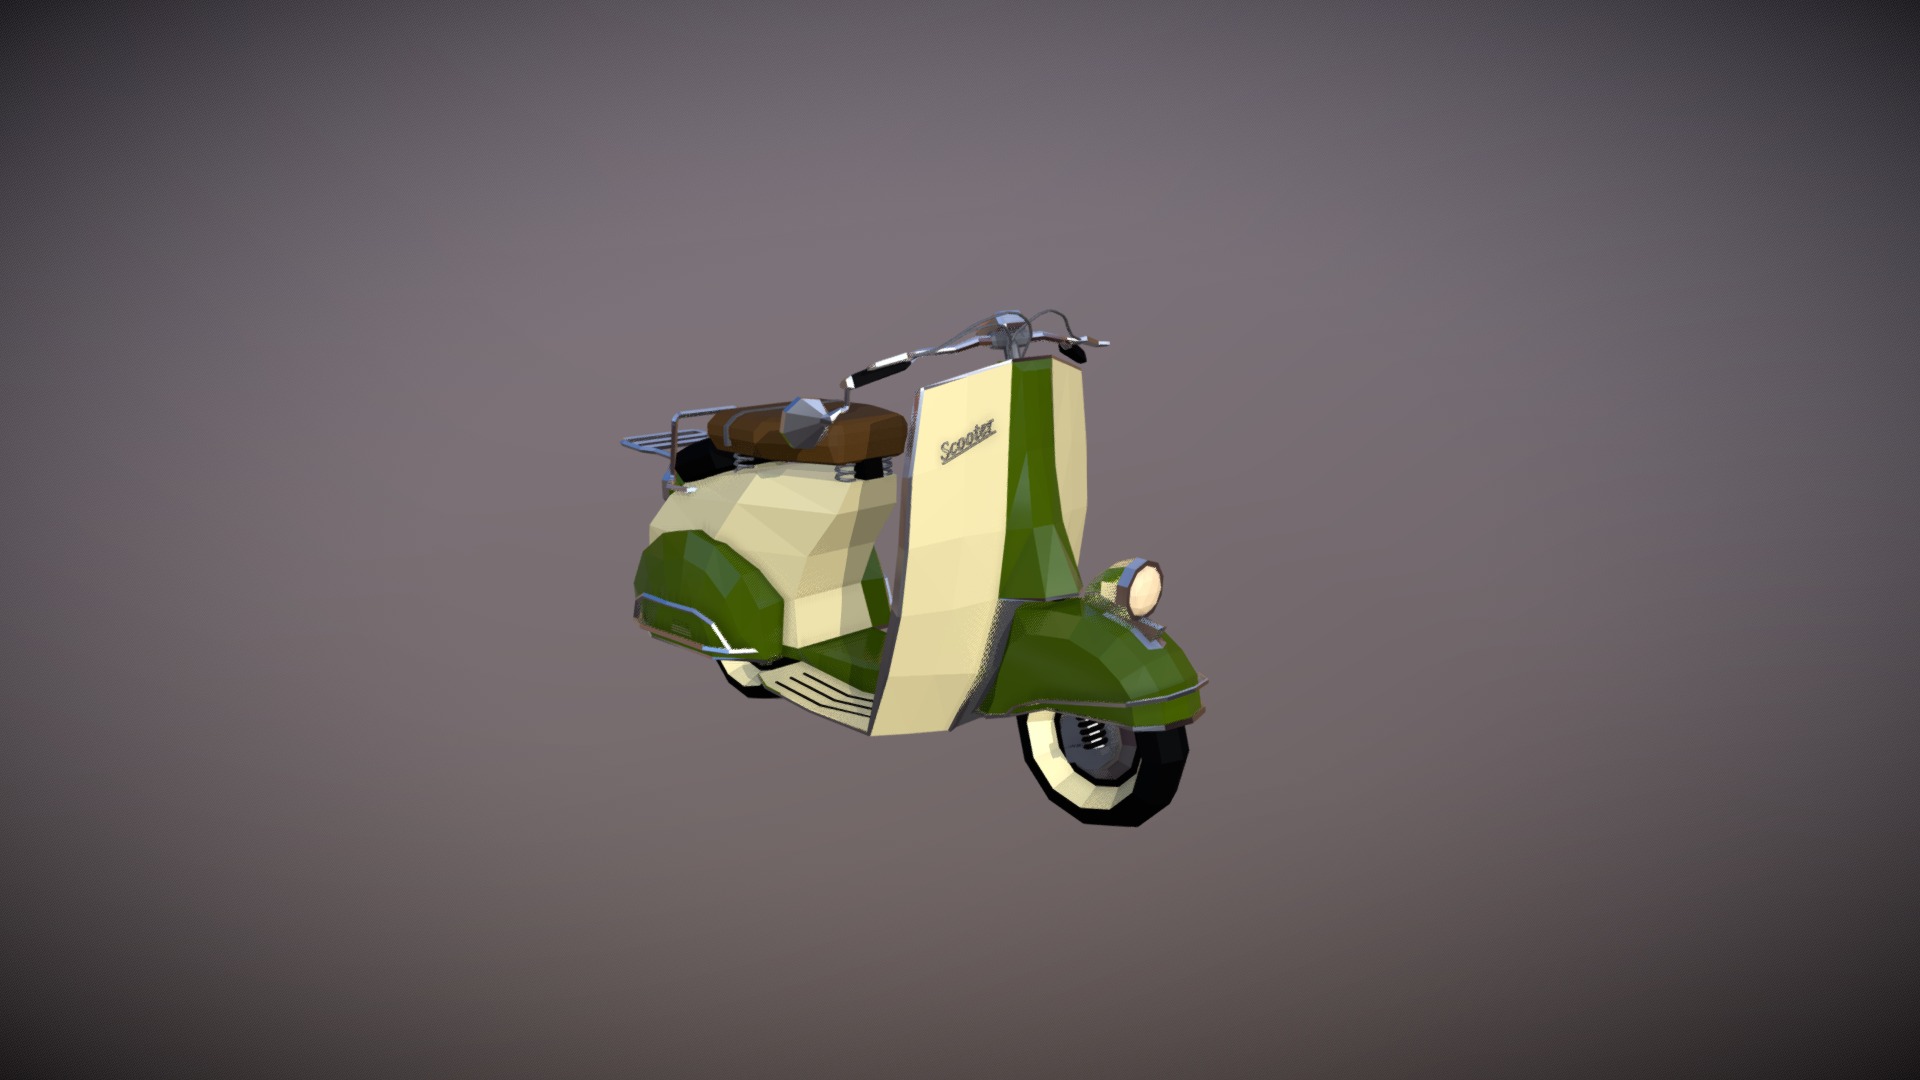 3D model Low Poly Scooter 04 - This is a 3D model of the Low Poly Scooter 04. The 3D model is about a green and white toy car.